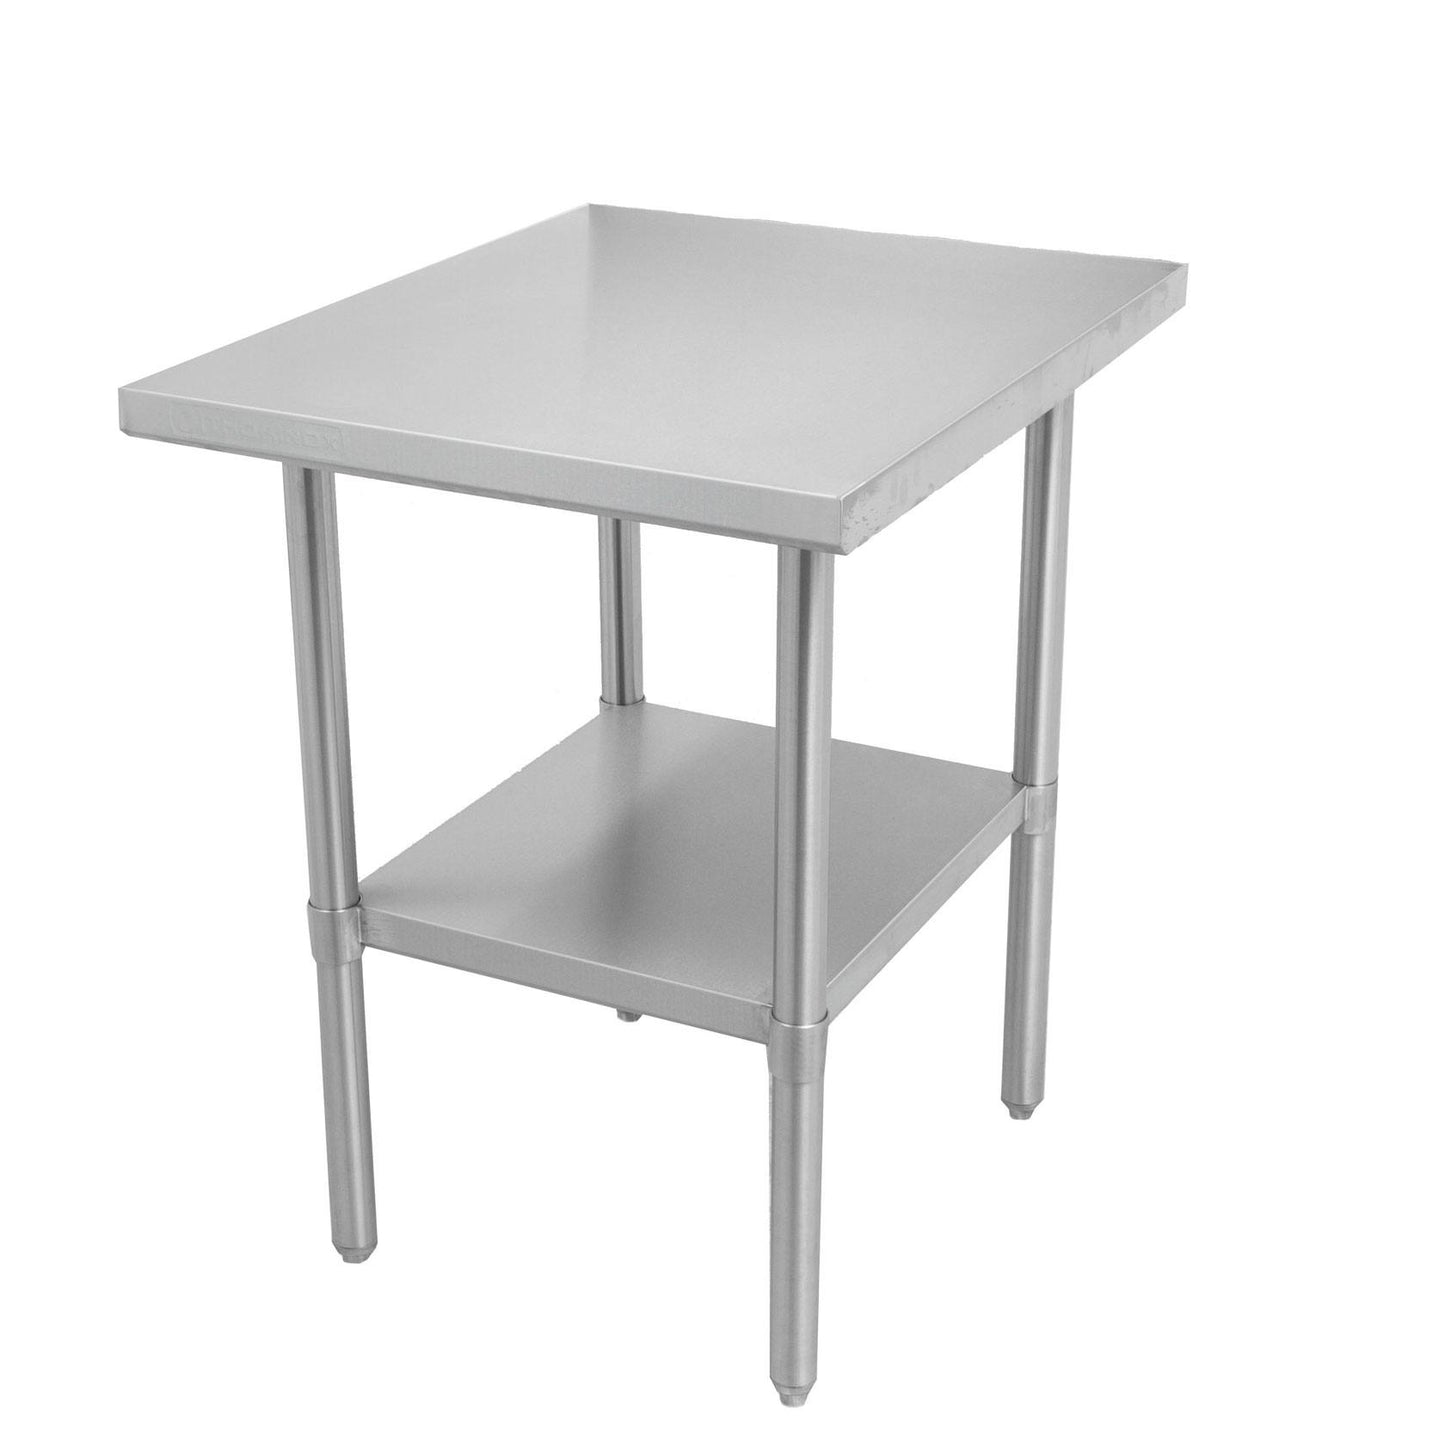 Thorinox DSST-2430-GS Table, 30"W x 24"D x 34"H, Stainless Steel Table with Galvanized Shelf